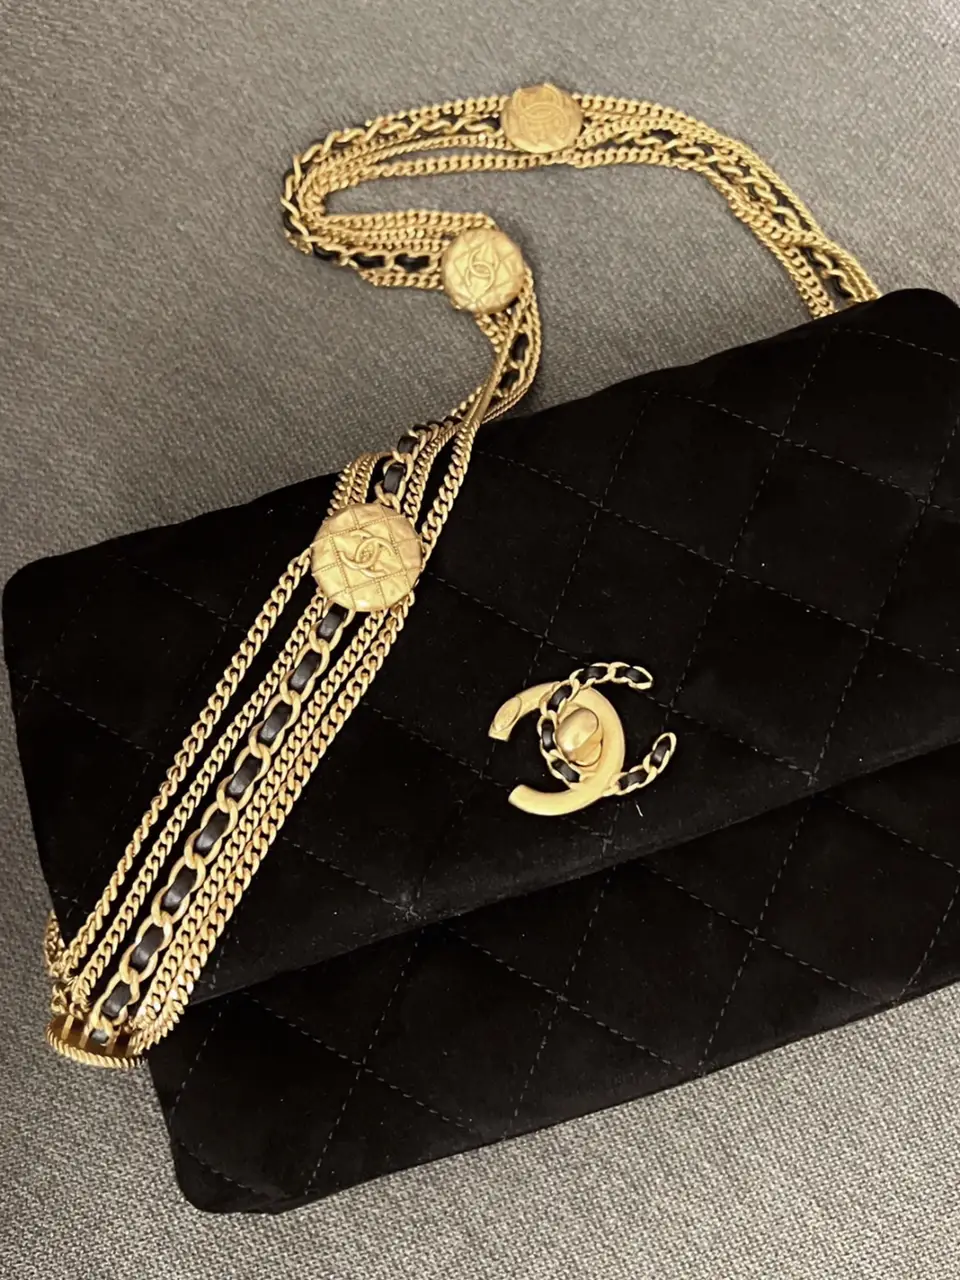 Chanel 22A mini flap bag, Gallery posted by Luxury bags🛍